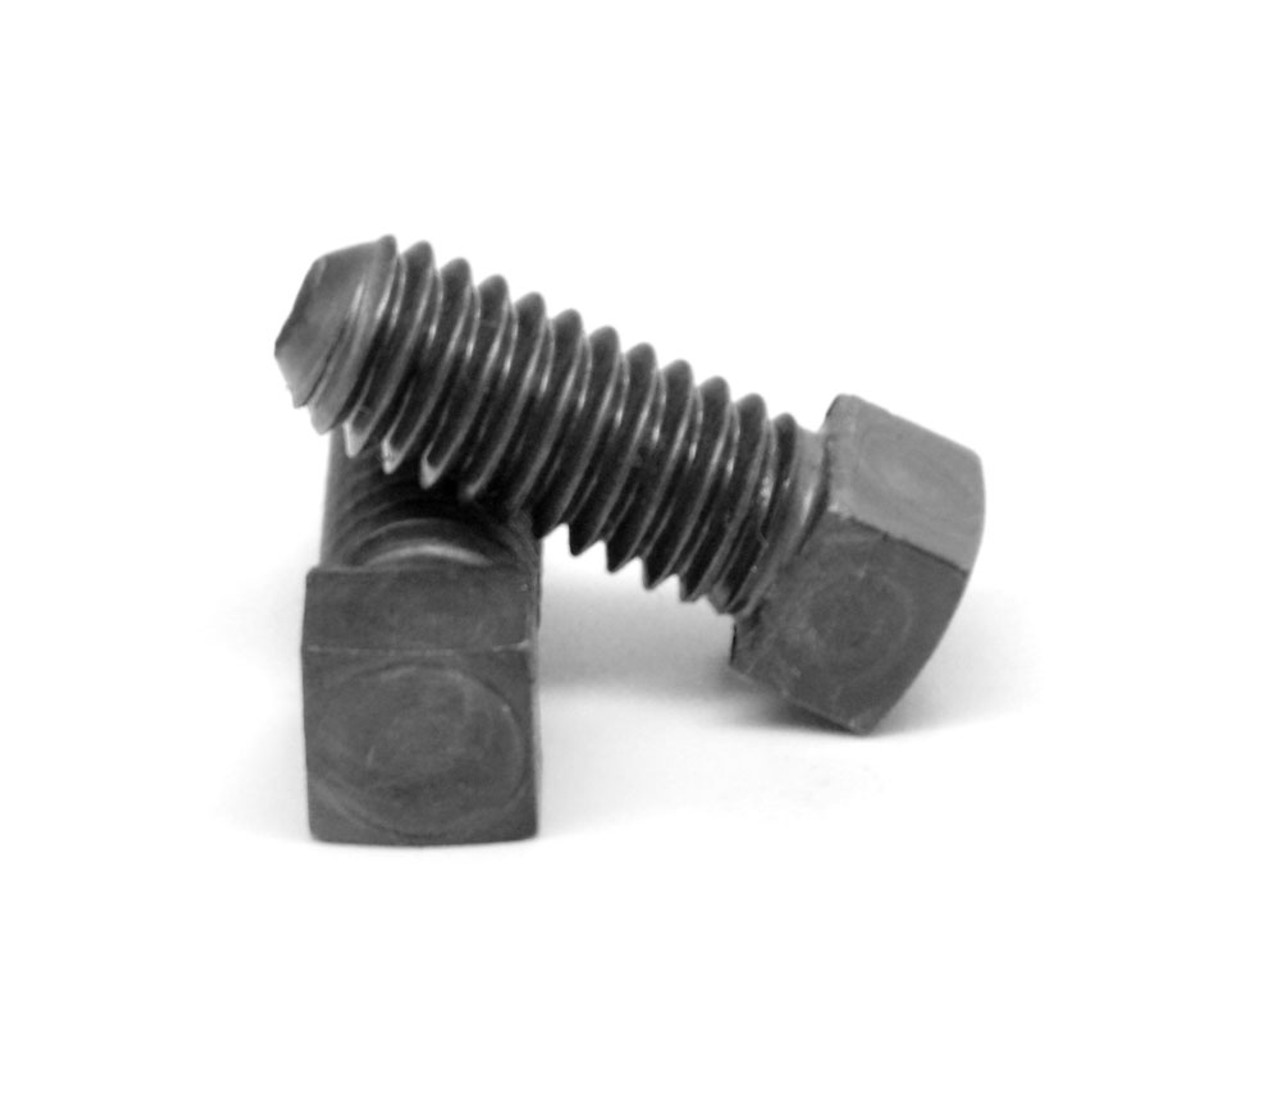 1"-14 x 4 1/2" (FT) UNS Thread Square Head Set Screw Cup Point Low Carbon Steel Case Hardened Plain Finish